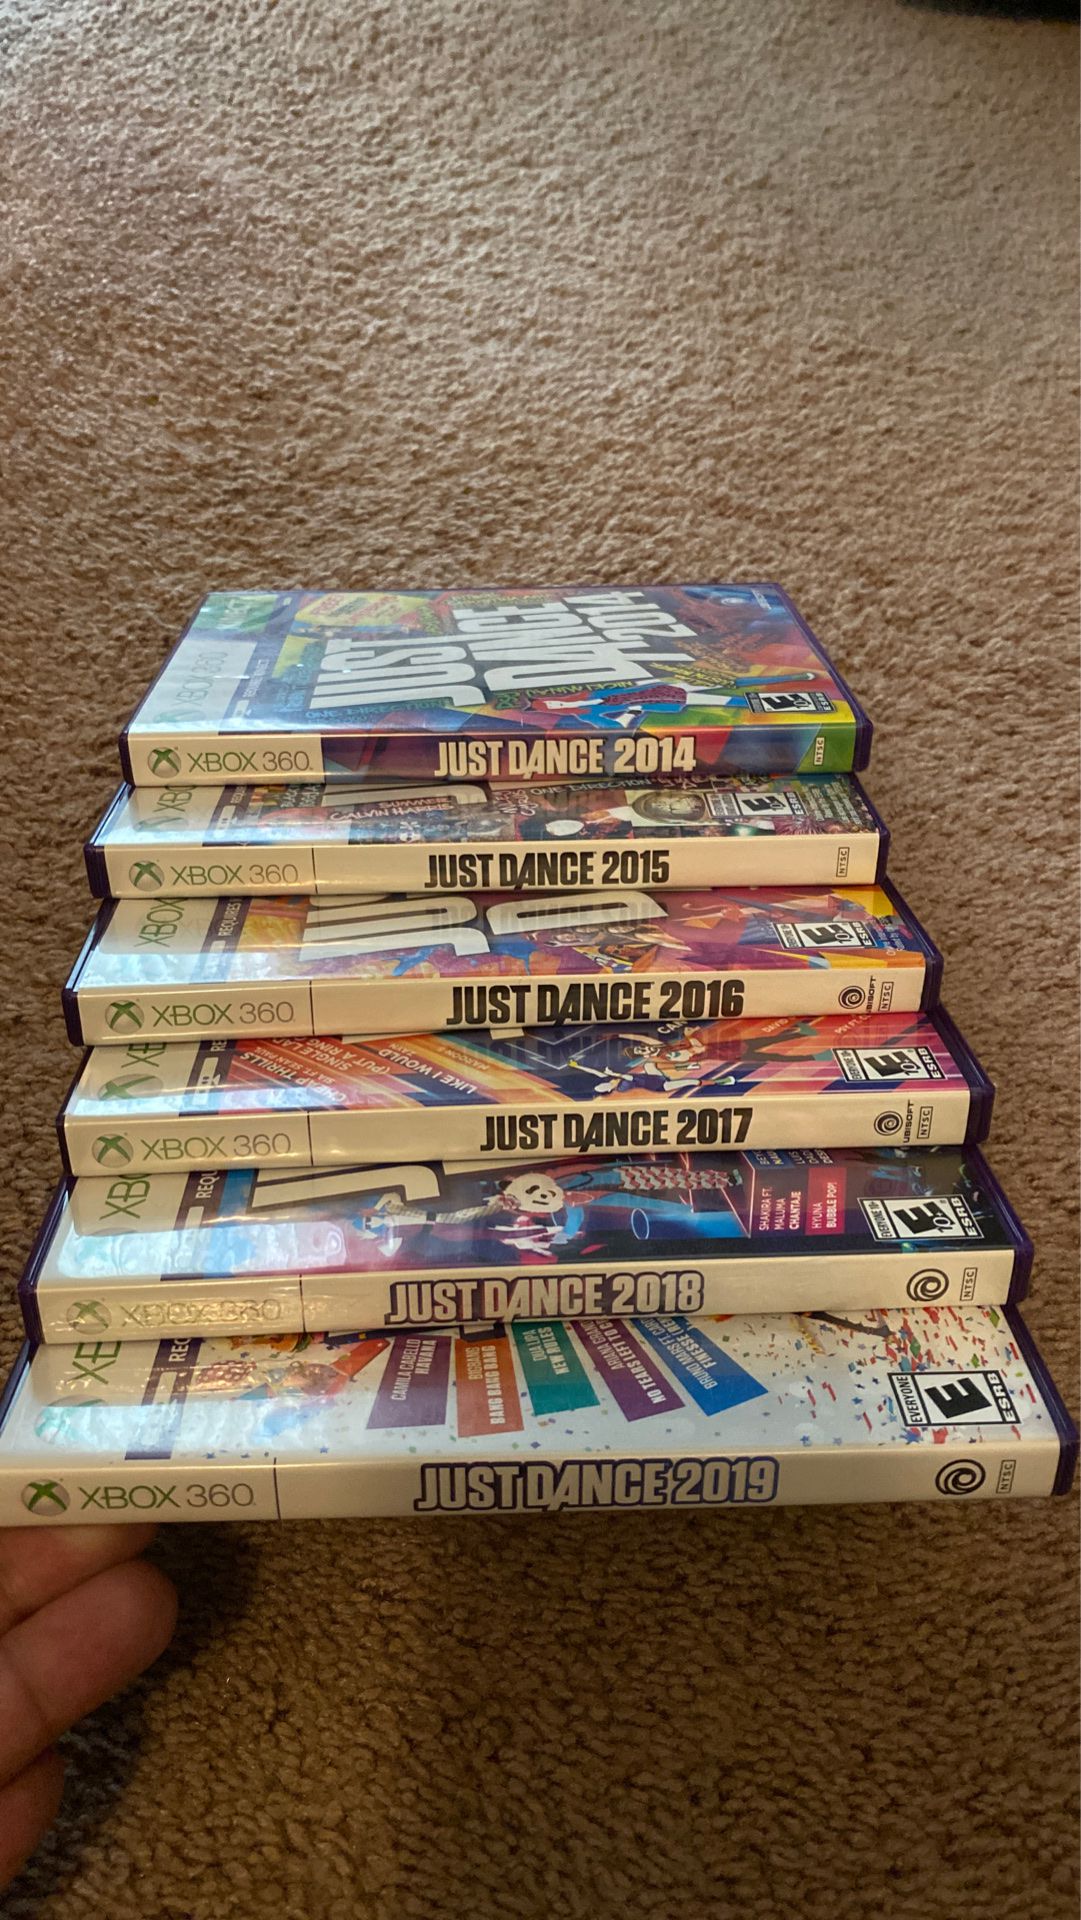 Entire Just Dance collection from 2014-2019. Xbox 360 Kinect games